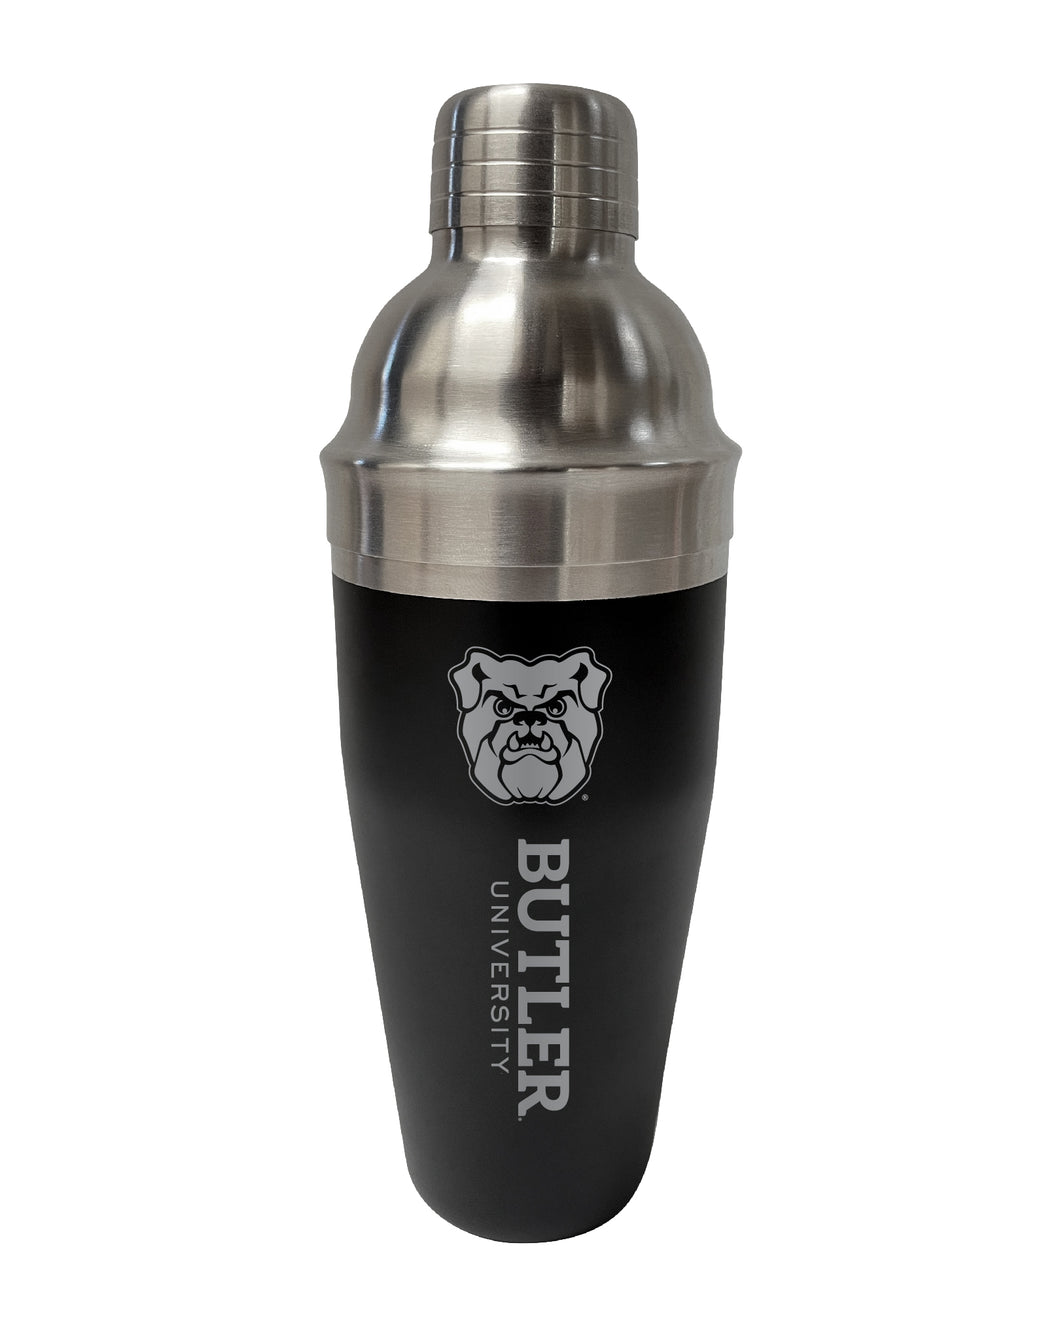 Butler Bulldogs NCAA Official 24 oz Engraved Stainless Steel Cocktail Shaker | College Team Spirit Drink Mixer